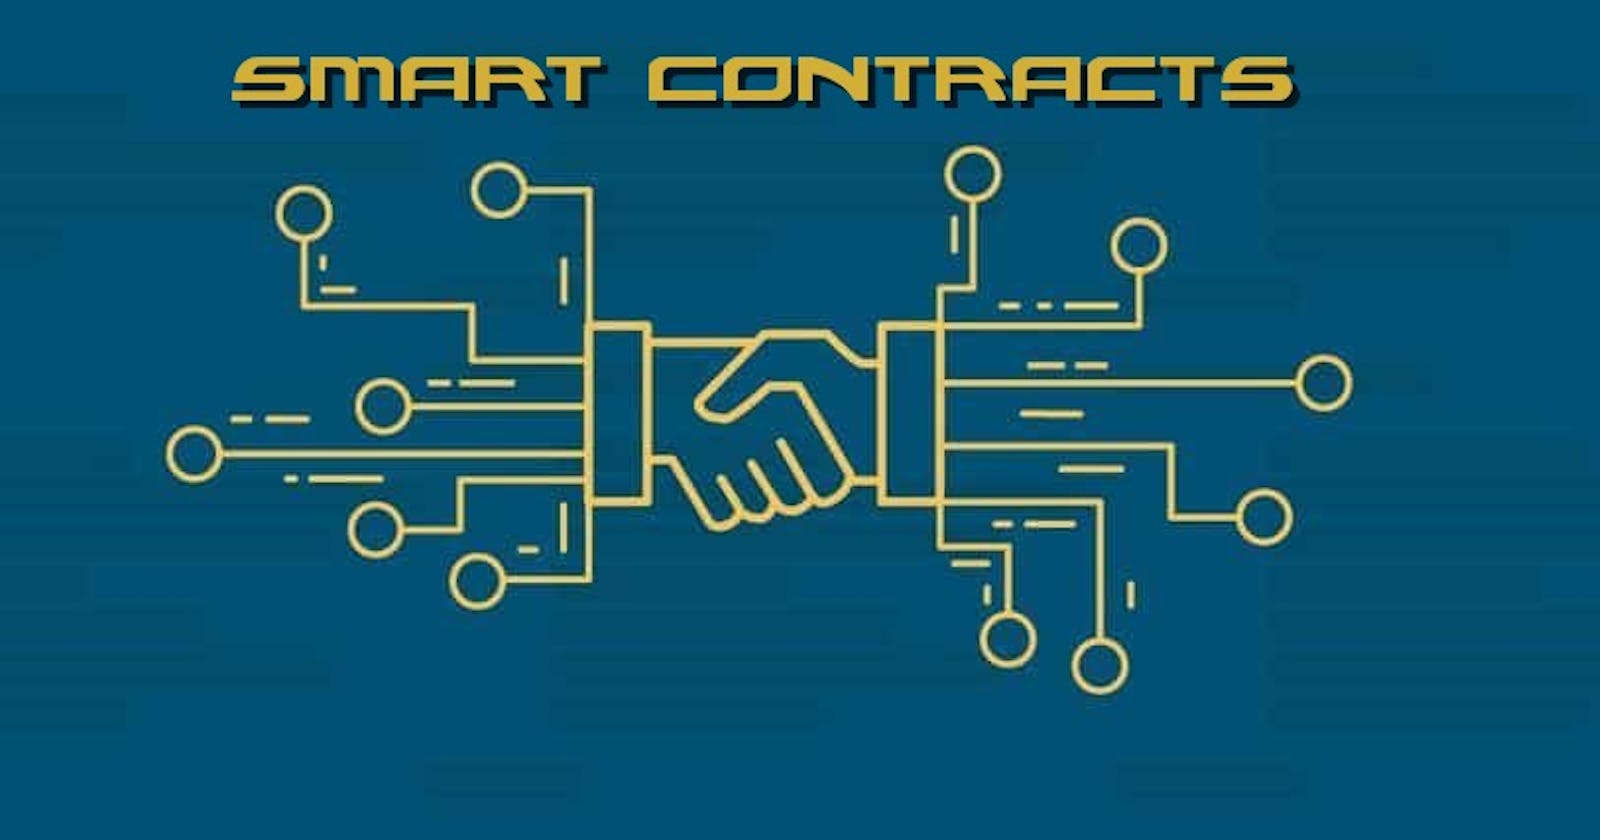 Smart Contracts - no need for middlemen